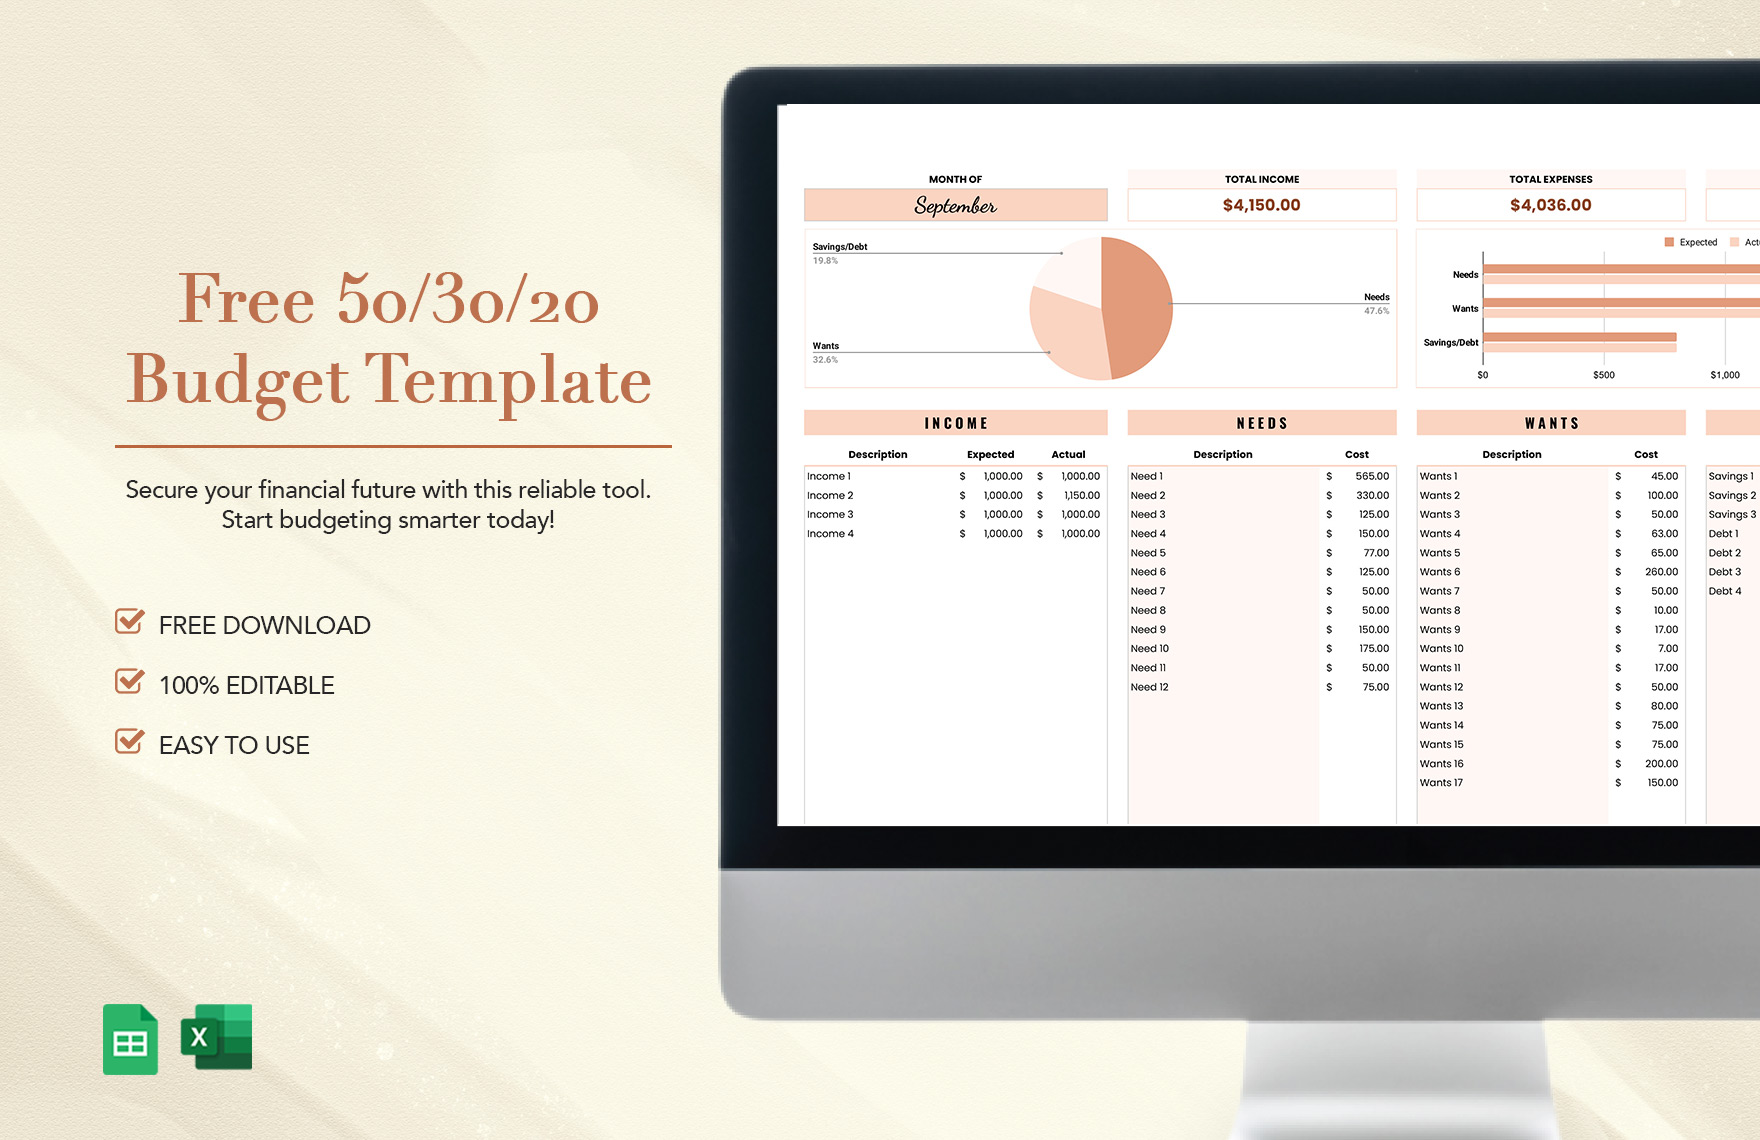 Free 50/30/20 Budget Template